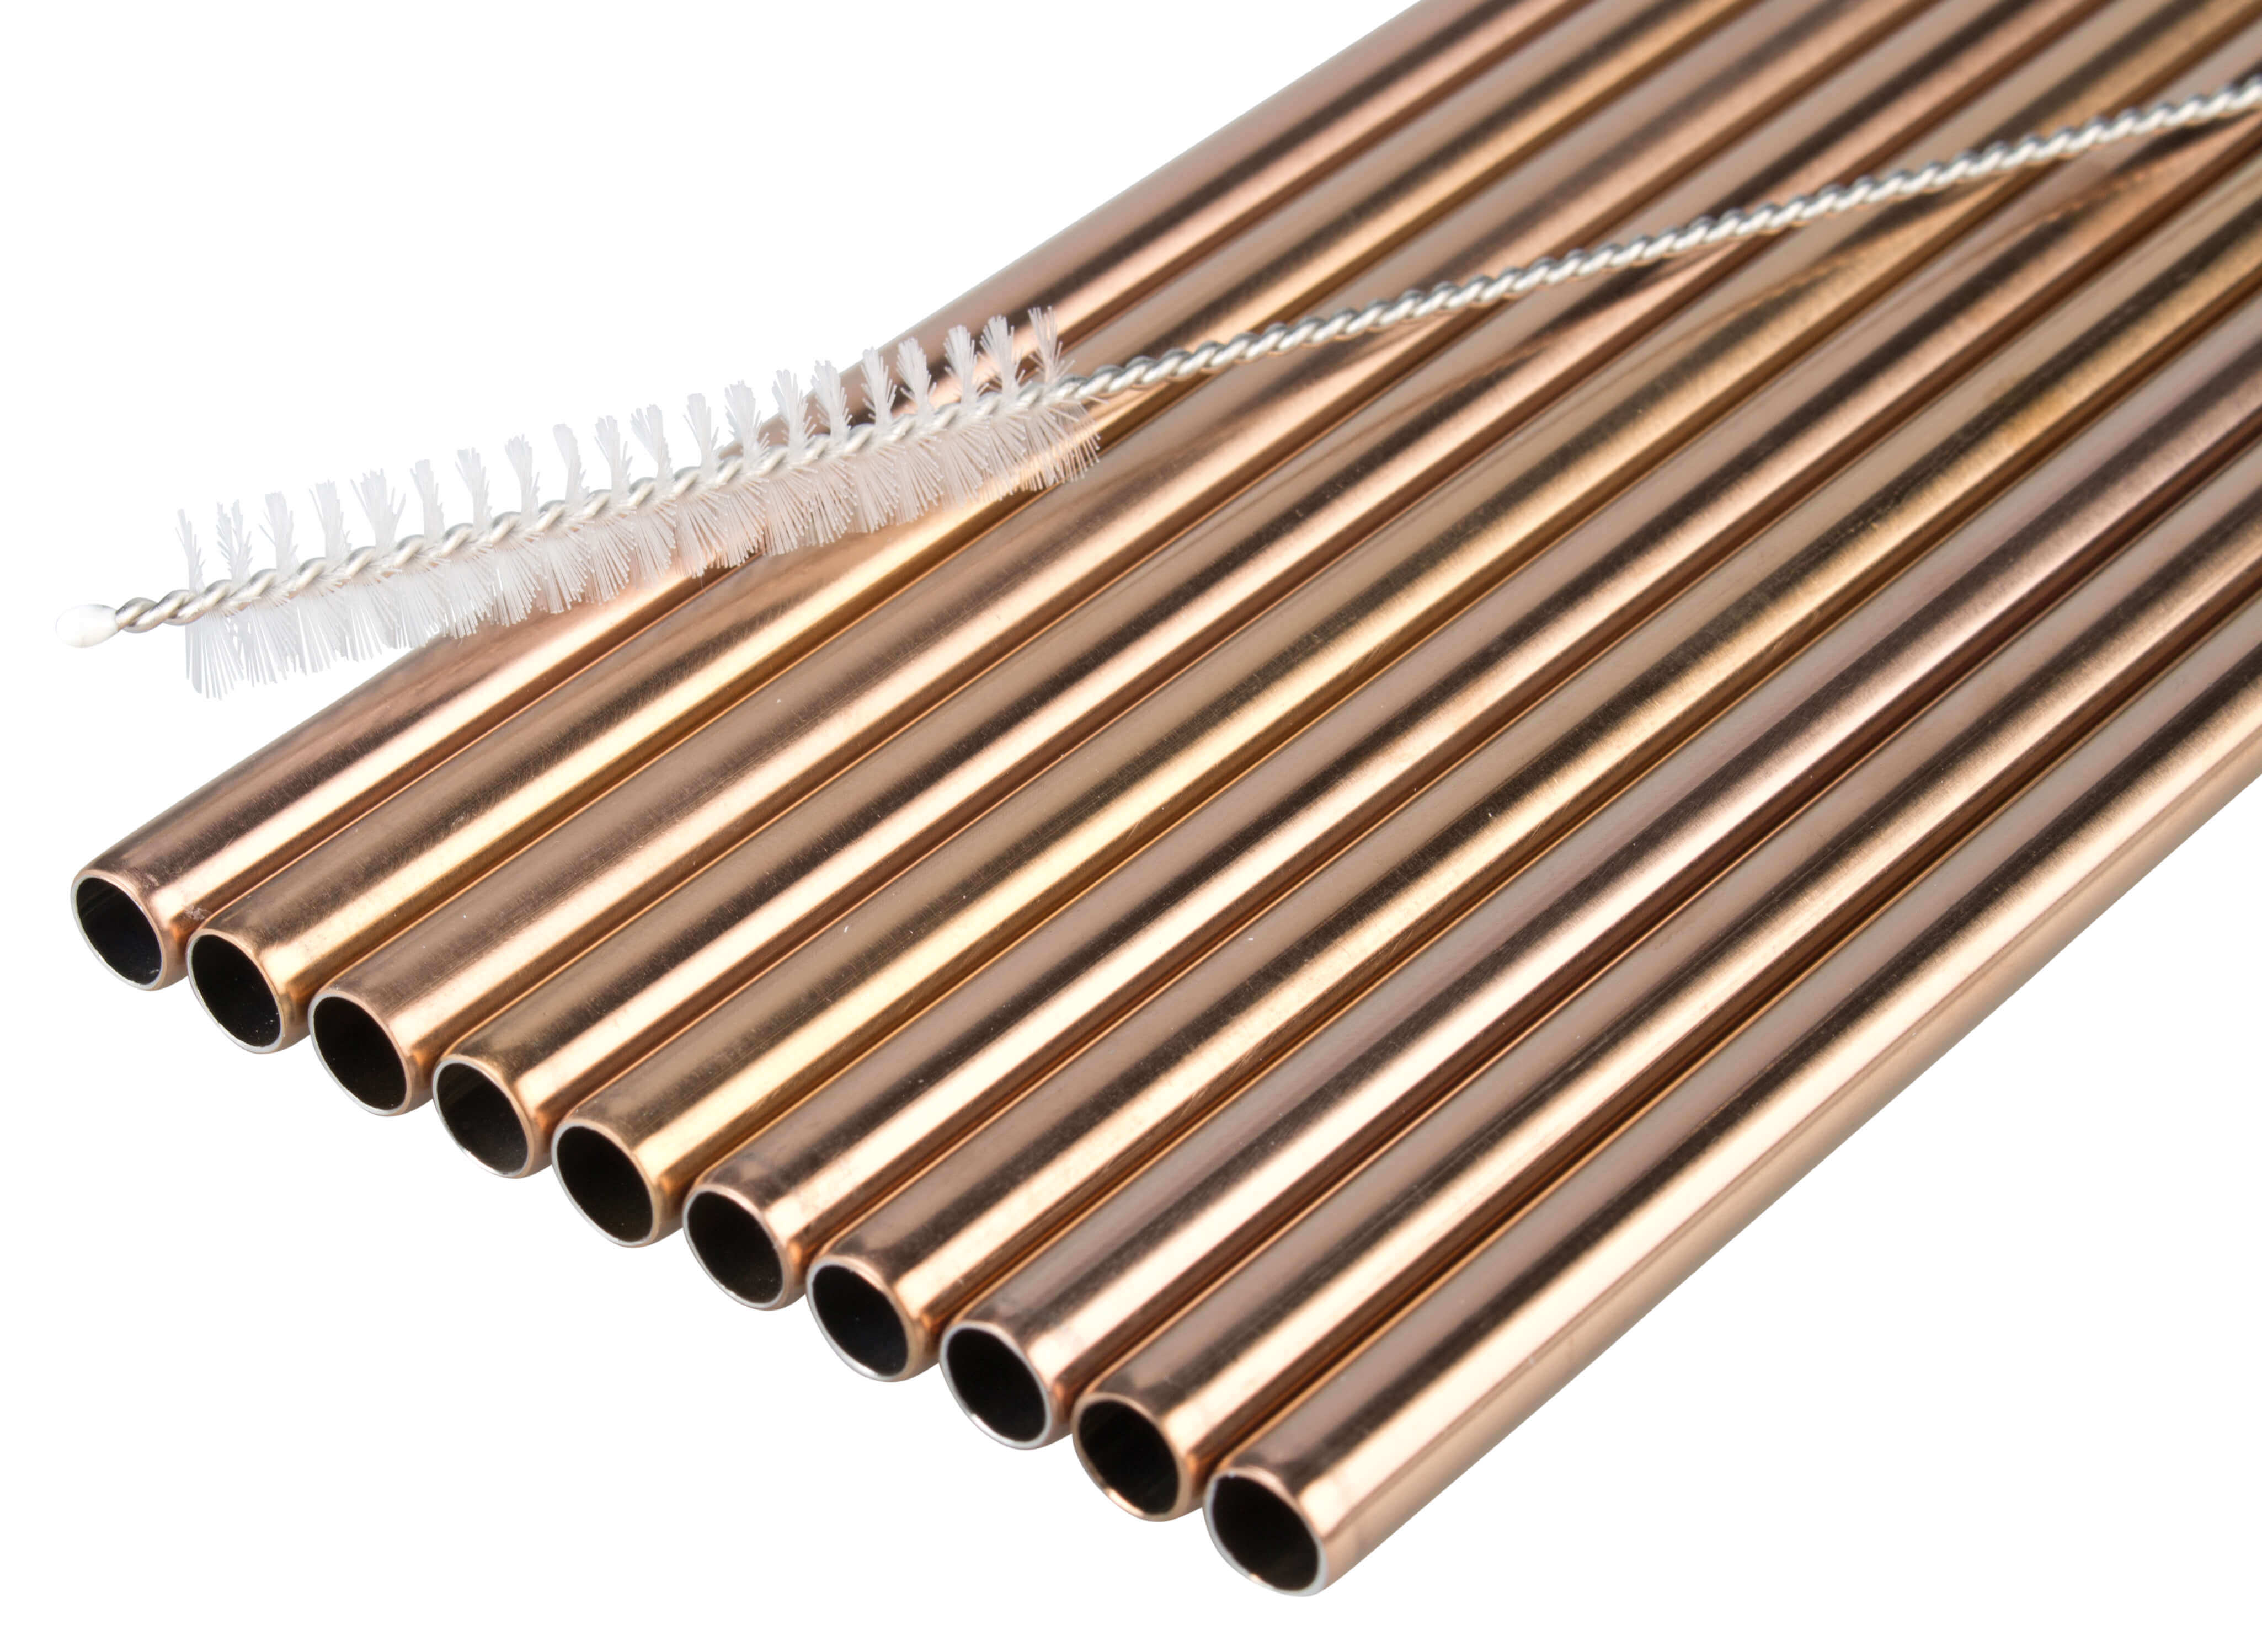 Drinking straws, stainless steel (8x215mm), copper-colored - 10 pcs. plus cleaning brush